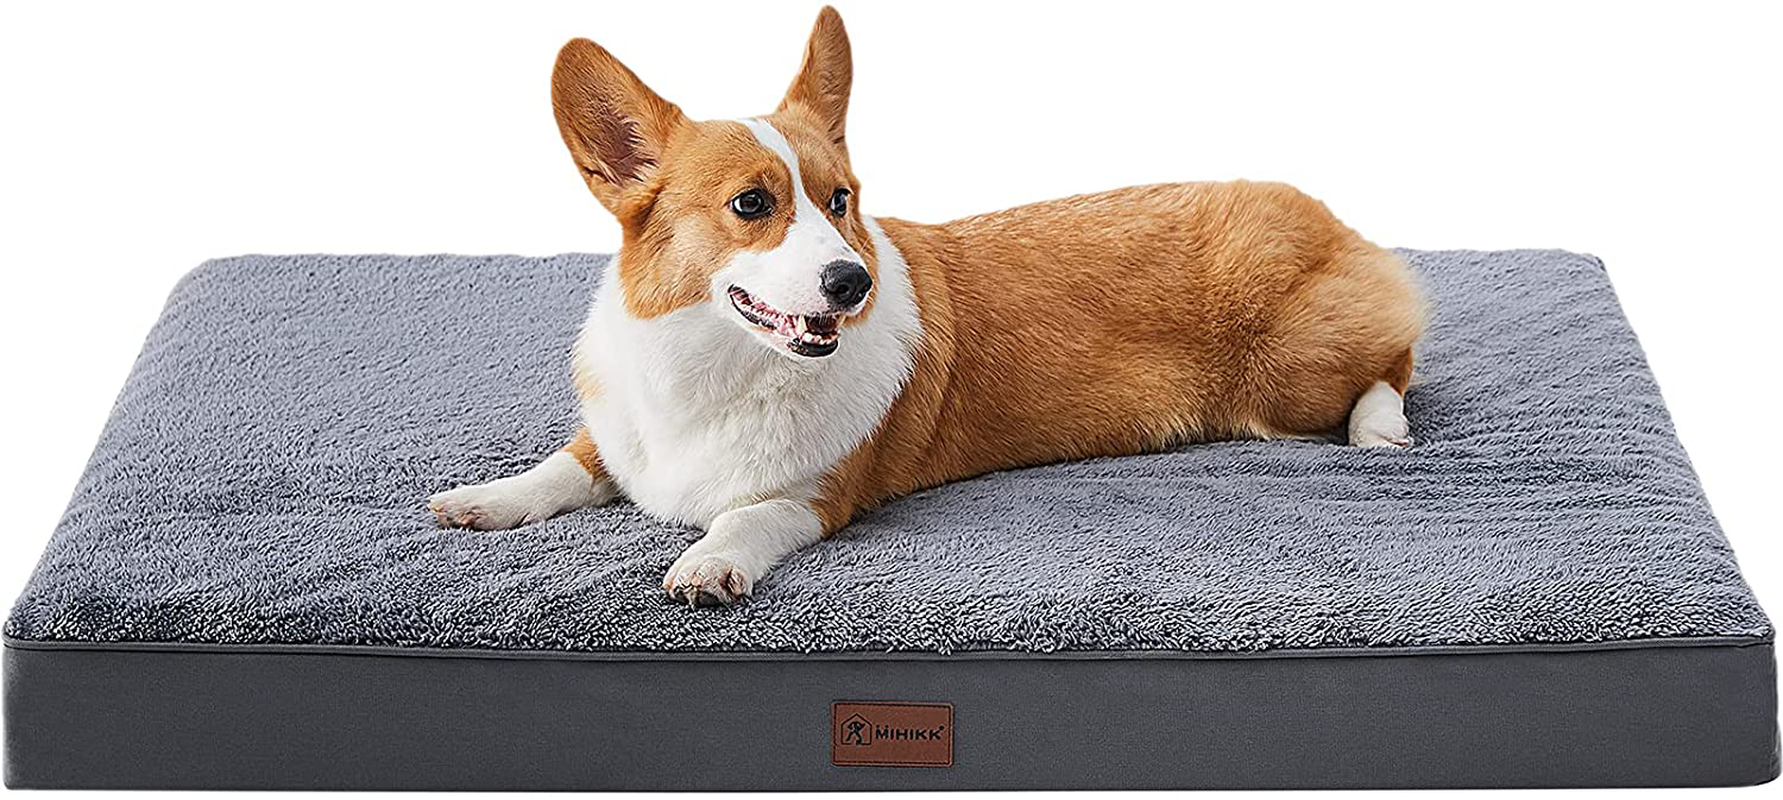 MIHIKK Orthopedic Dog Bed for Medium, Large Dogs, Egg-Crate Foam Dog Bed with Removable Waterproof Cover, Pet Bed Machine Washable Animals & Pet Supplies > Pet Supplies > Dog Supplies > Dog Beds MIHIKK Dark grey 35 x 22 x 3 inch 